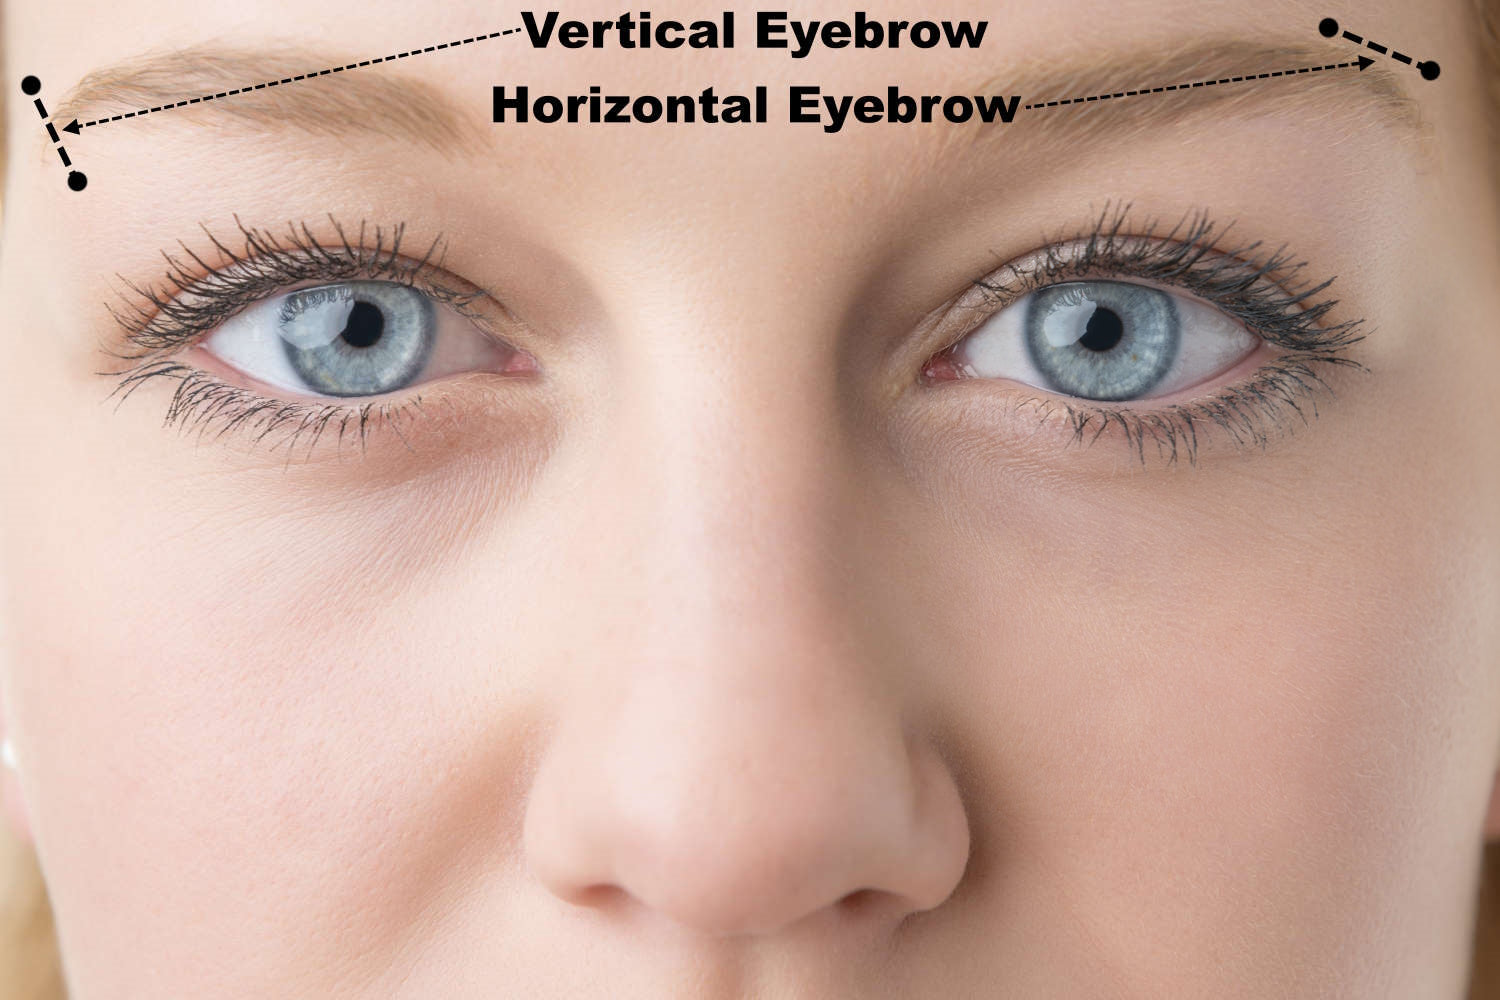 The locations on a woman's face diagram of the horizontal and vertical eyebrow piercings.